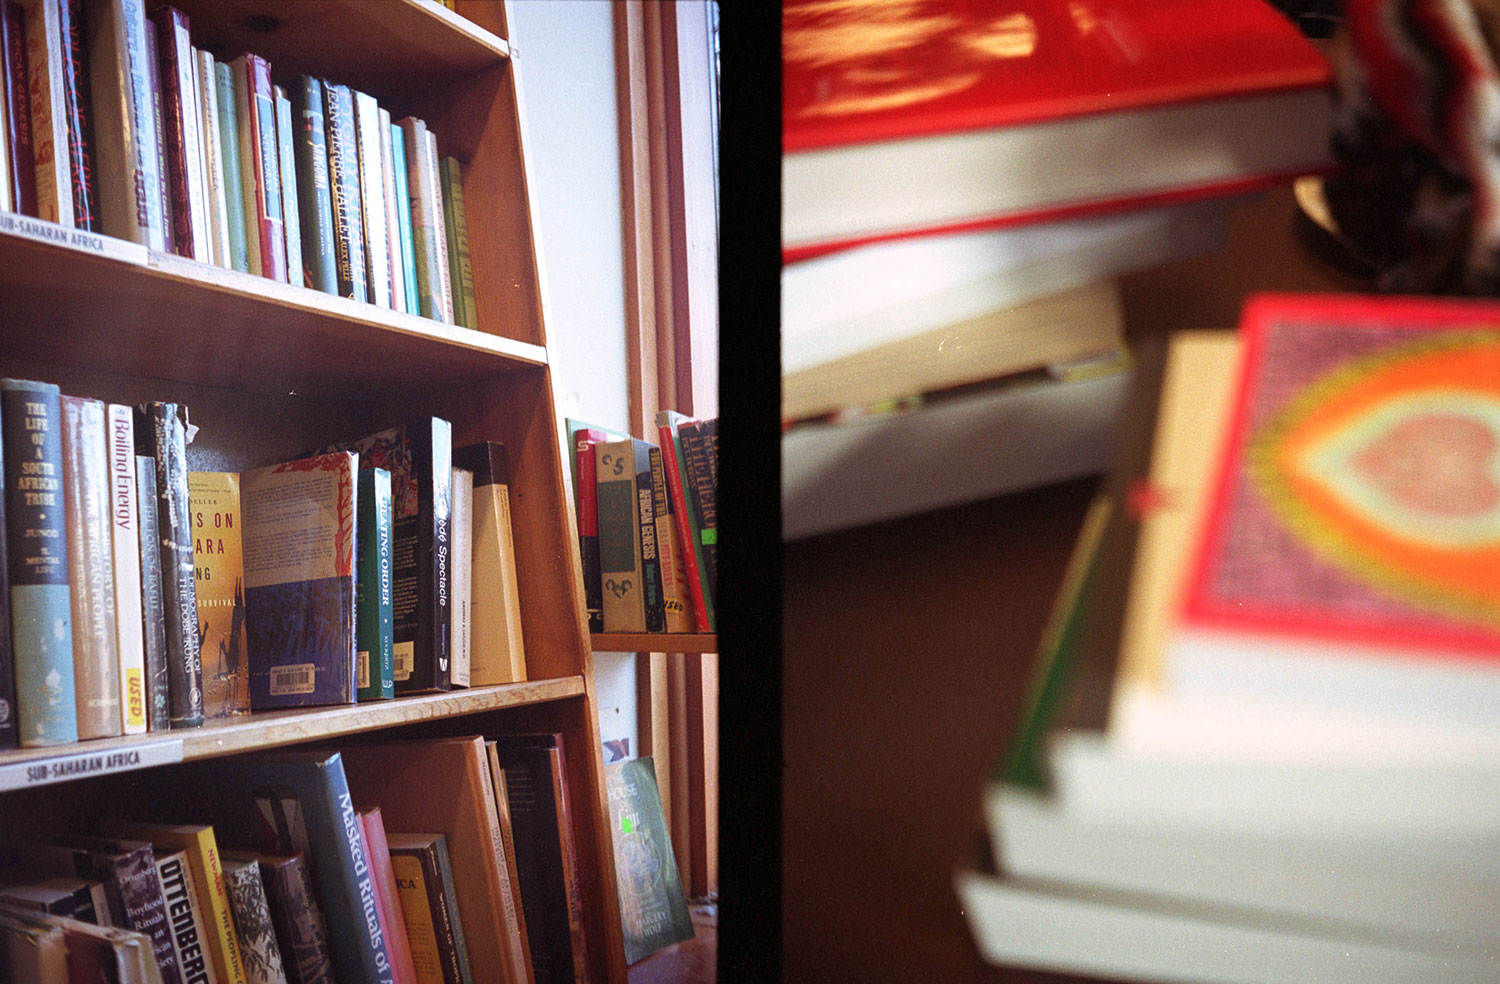 Half-frame photograph of shelves at a bookstore and a stack of books, circa 2007.